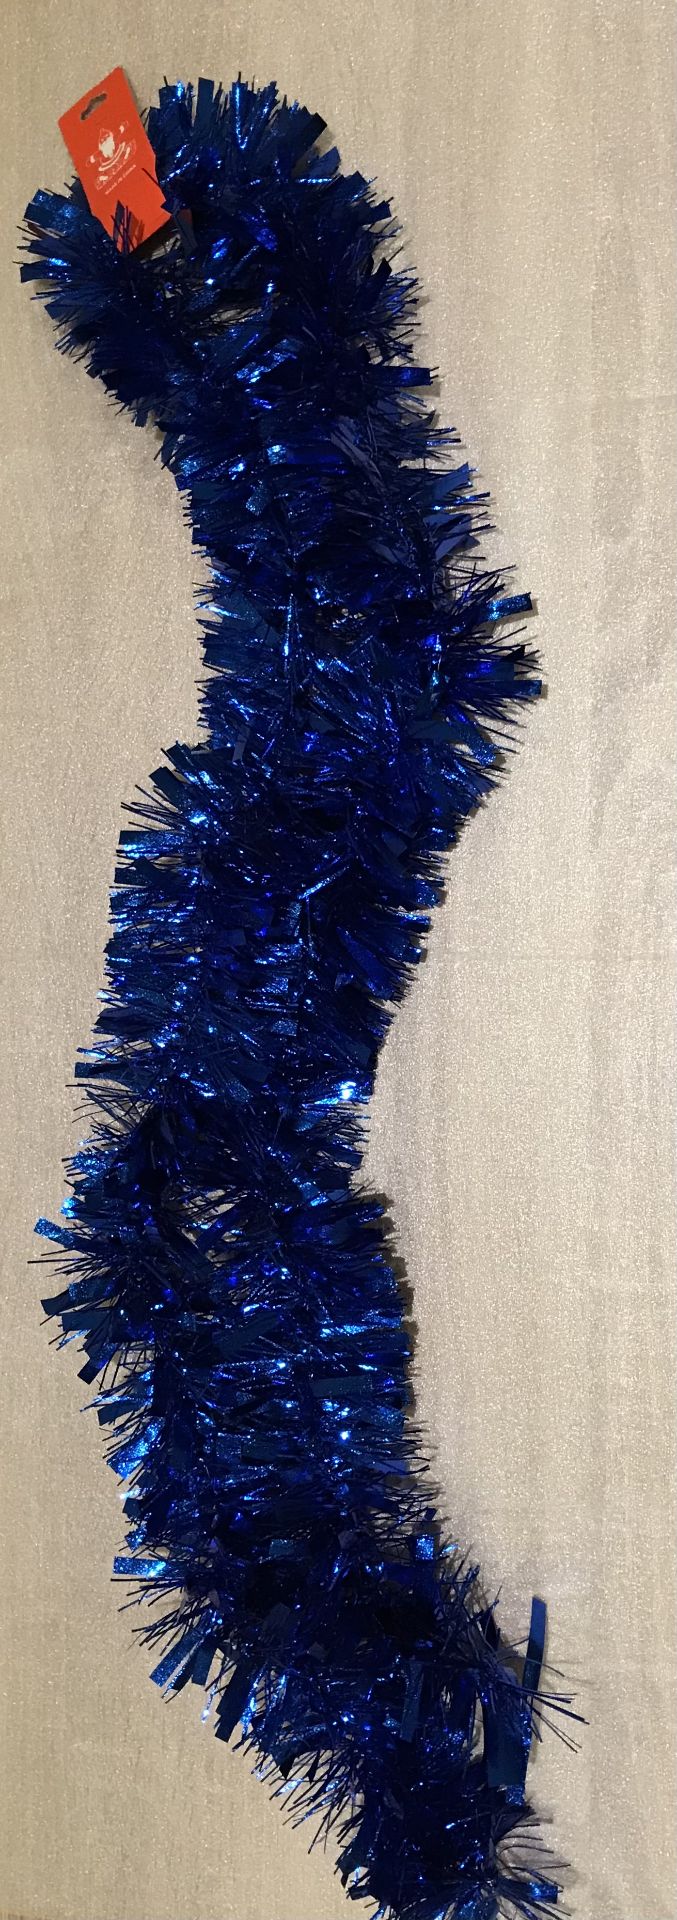 500 X Luxury Tinsel 1.8M 5 Colours Gold, Silver, Red, Blue, Green - Image 2 of 6